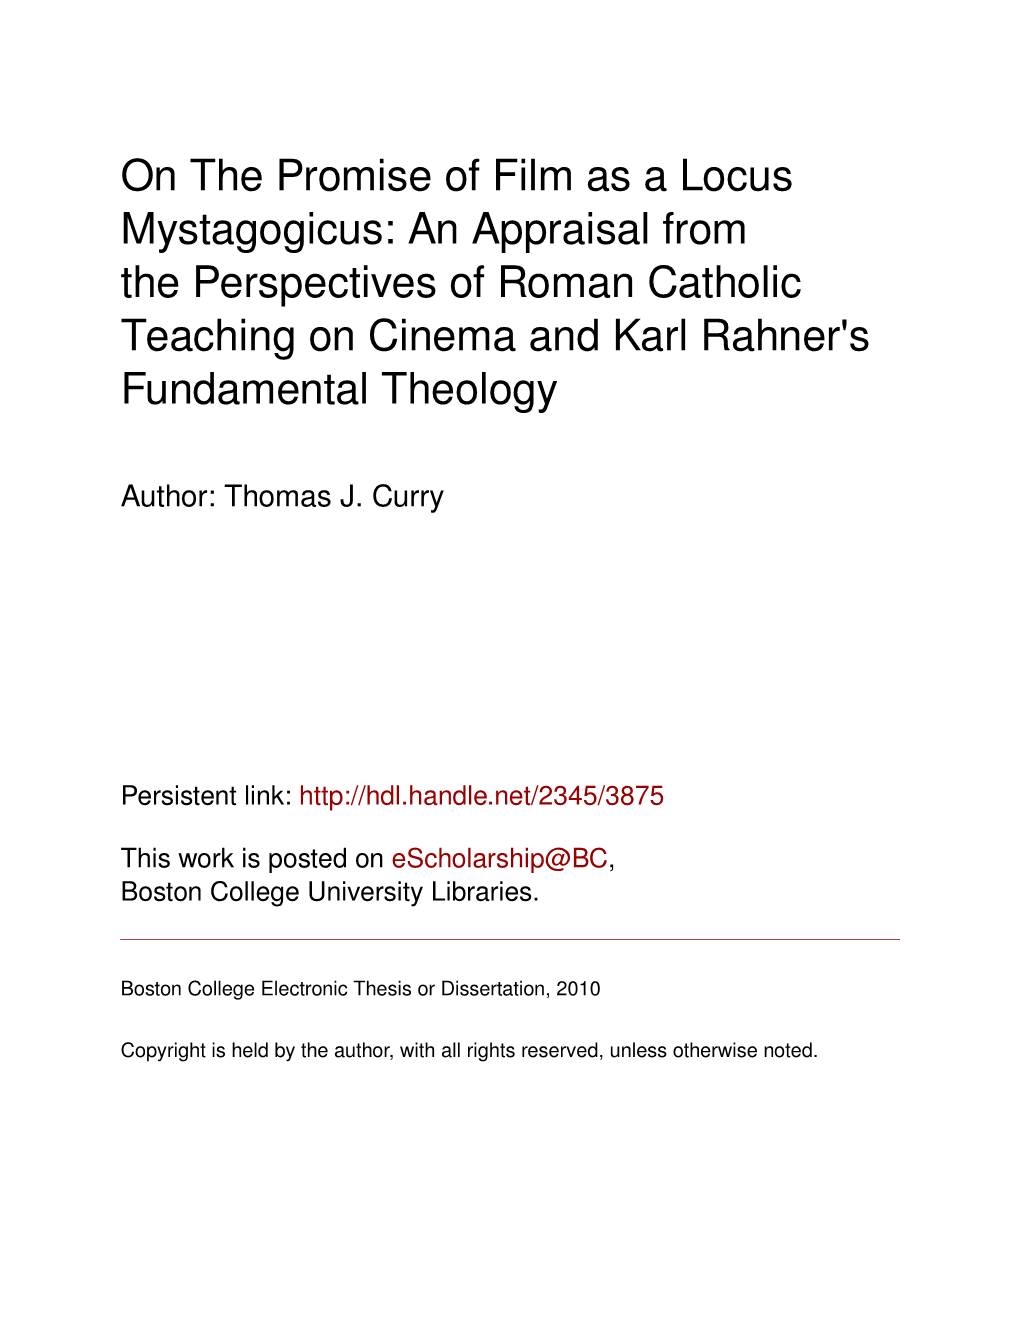 On the Promise of Film As a Locus Mystagogicus: an Appraisal from the Perspectives of Roman Catholic Teaching on Cinema and Karl Rahner's Fundamental Theology